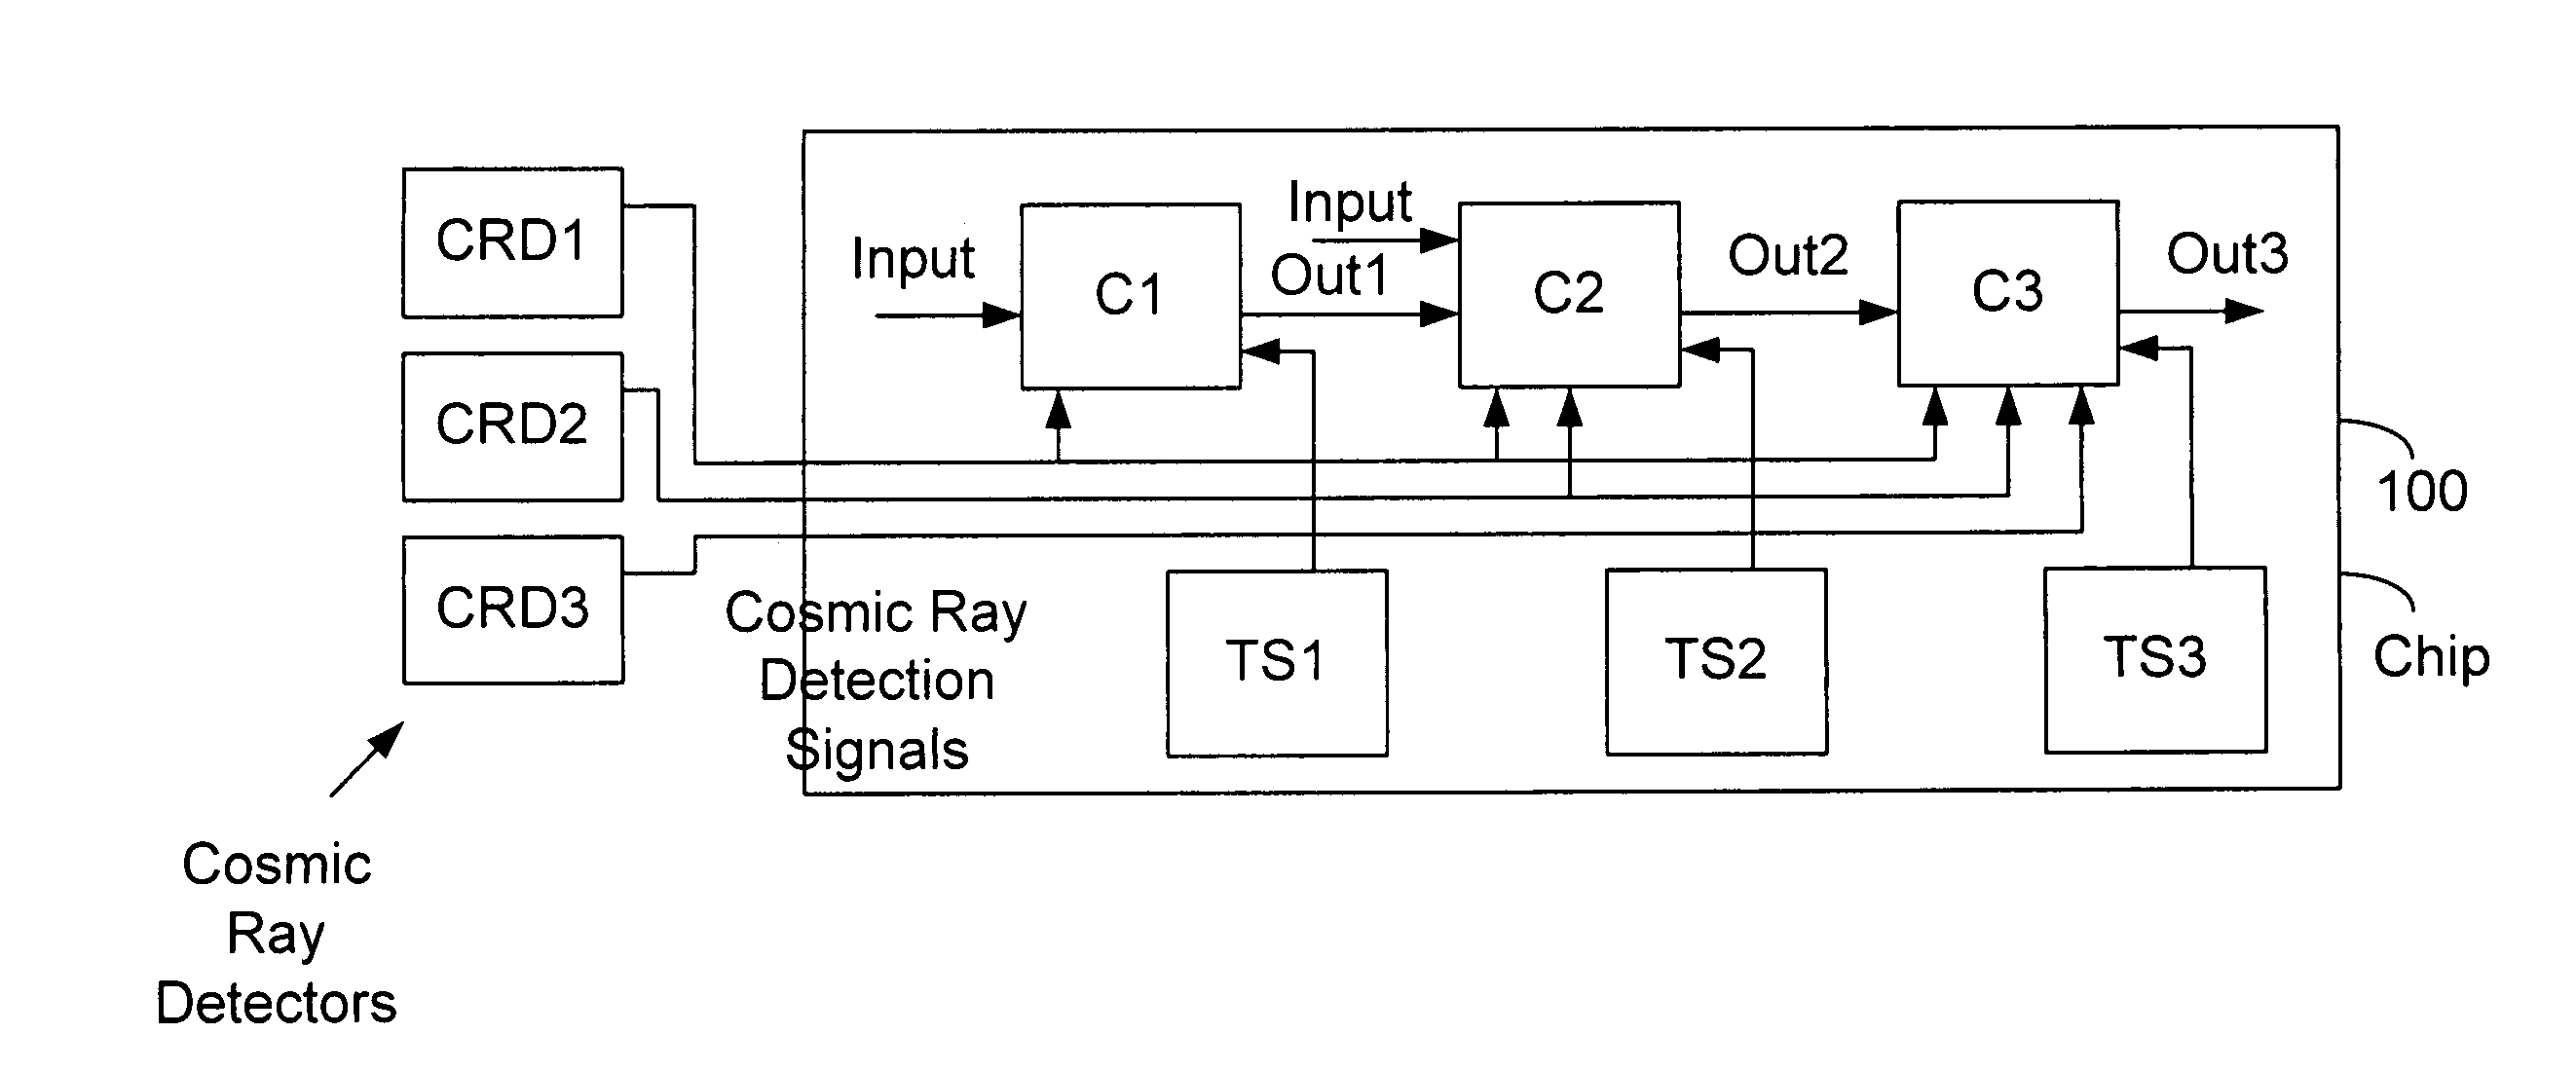 System with response to cosmic ray detection